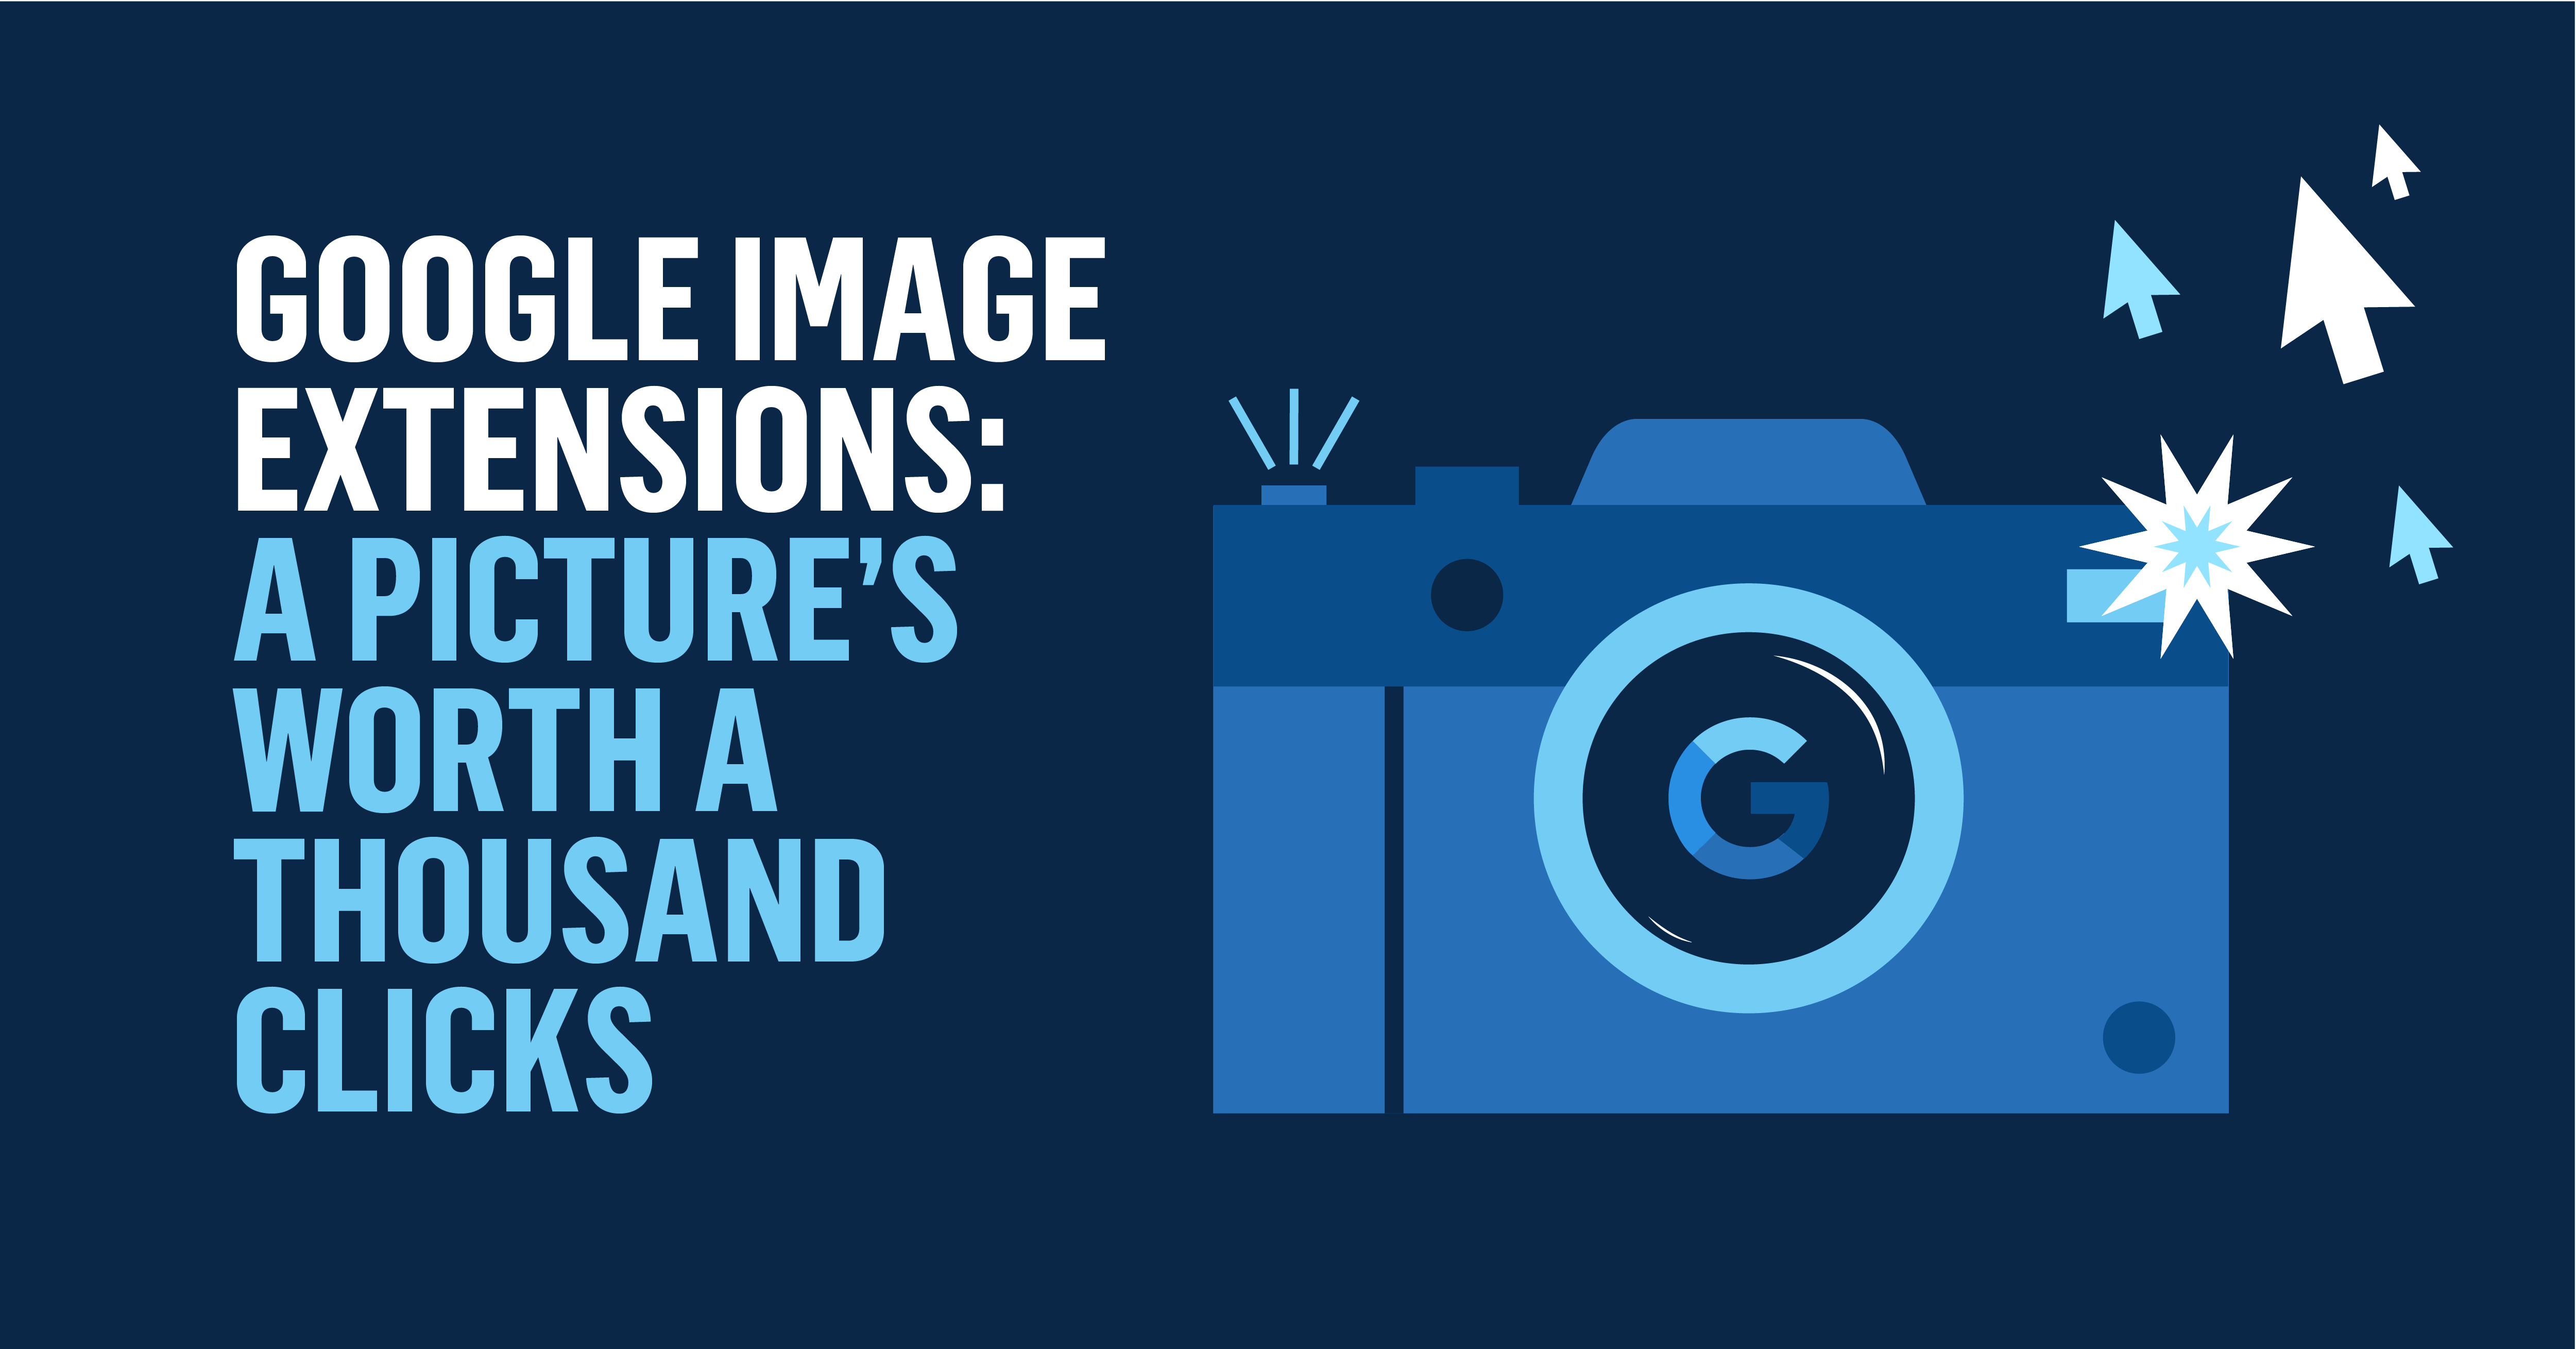 Google Image Extensions: A Picture's Worth a Thousand Clicks